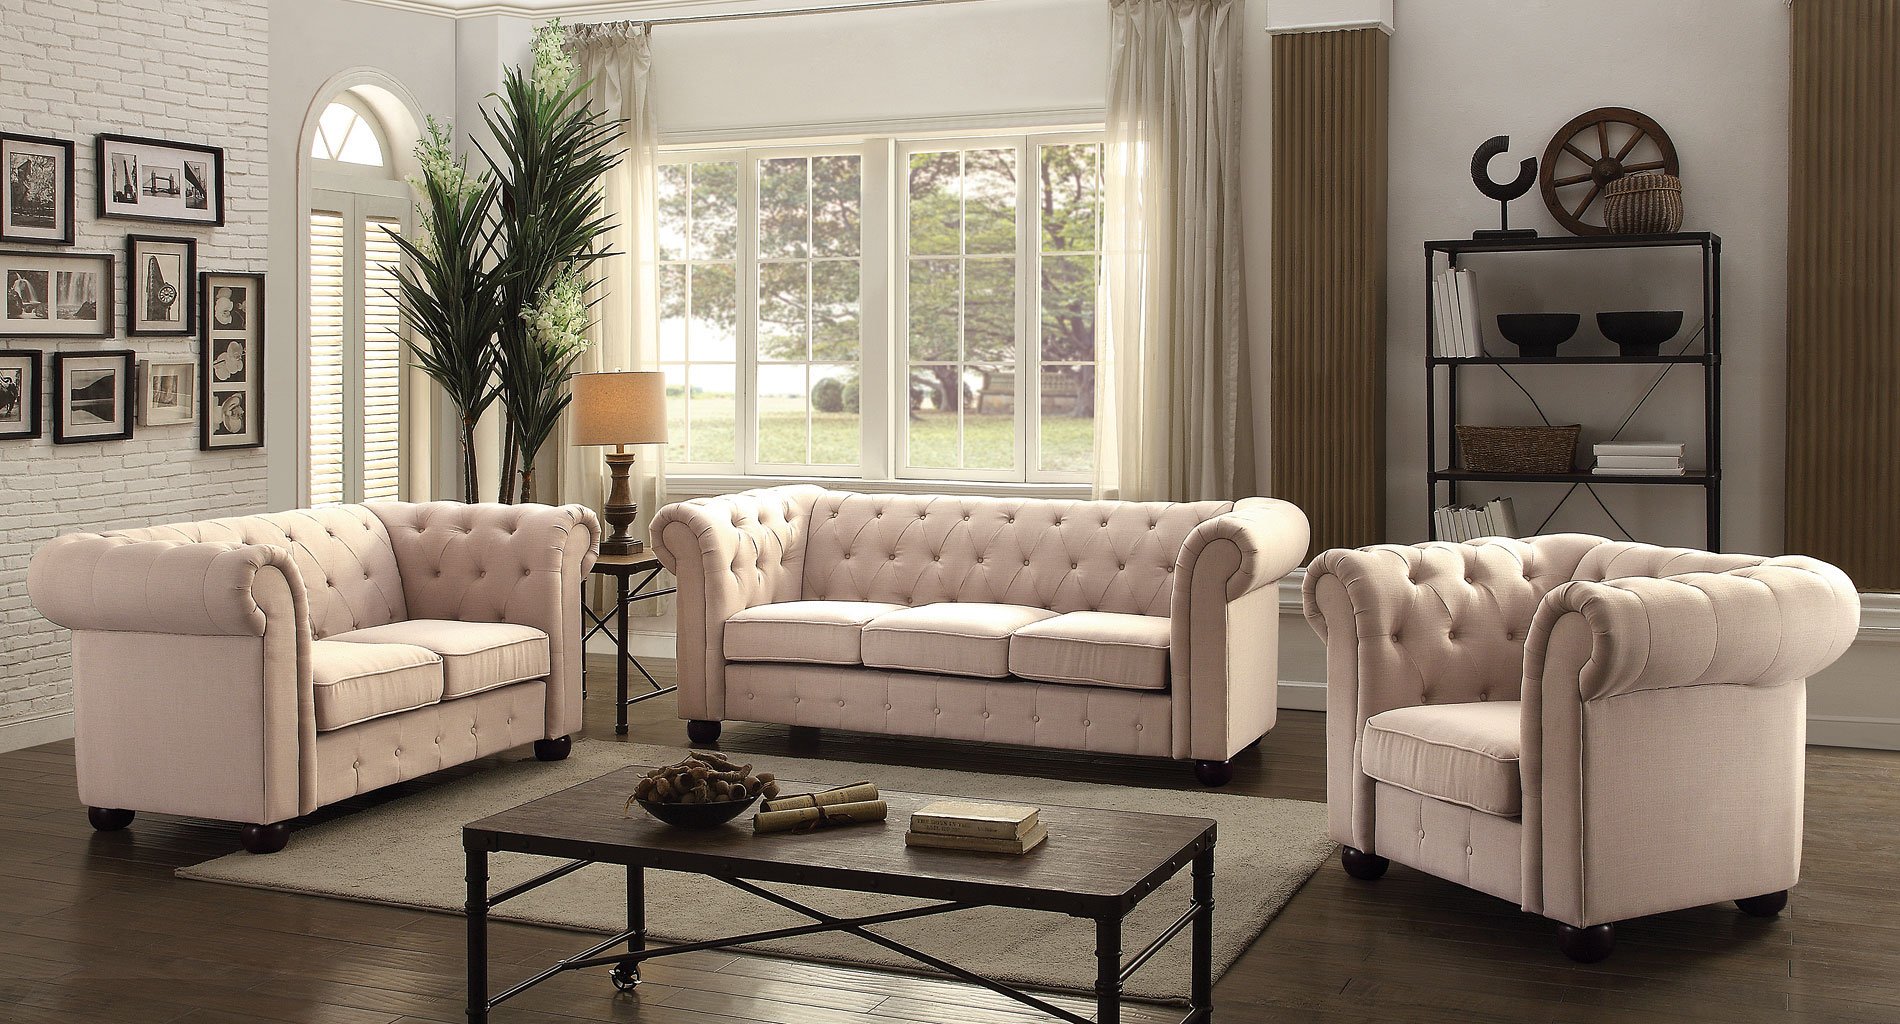 living room with tufted furniture